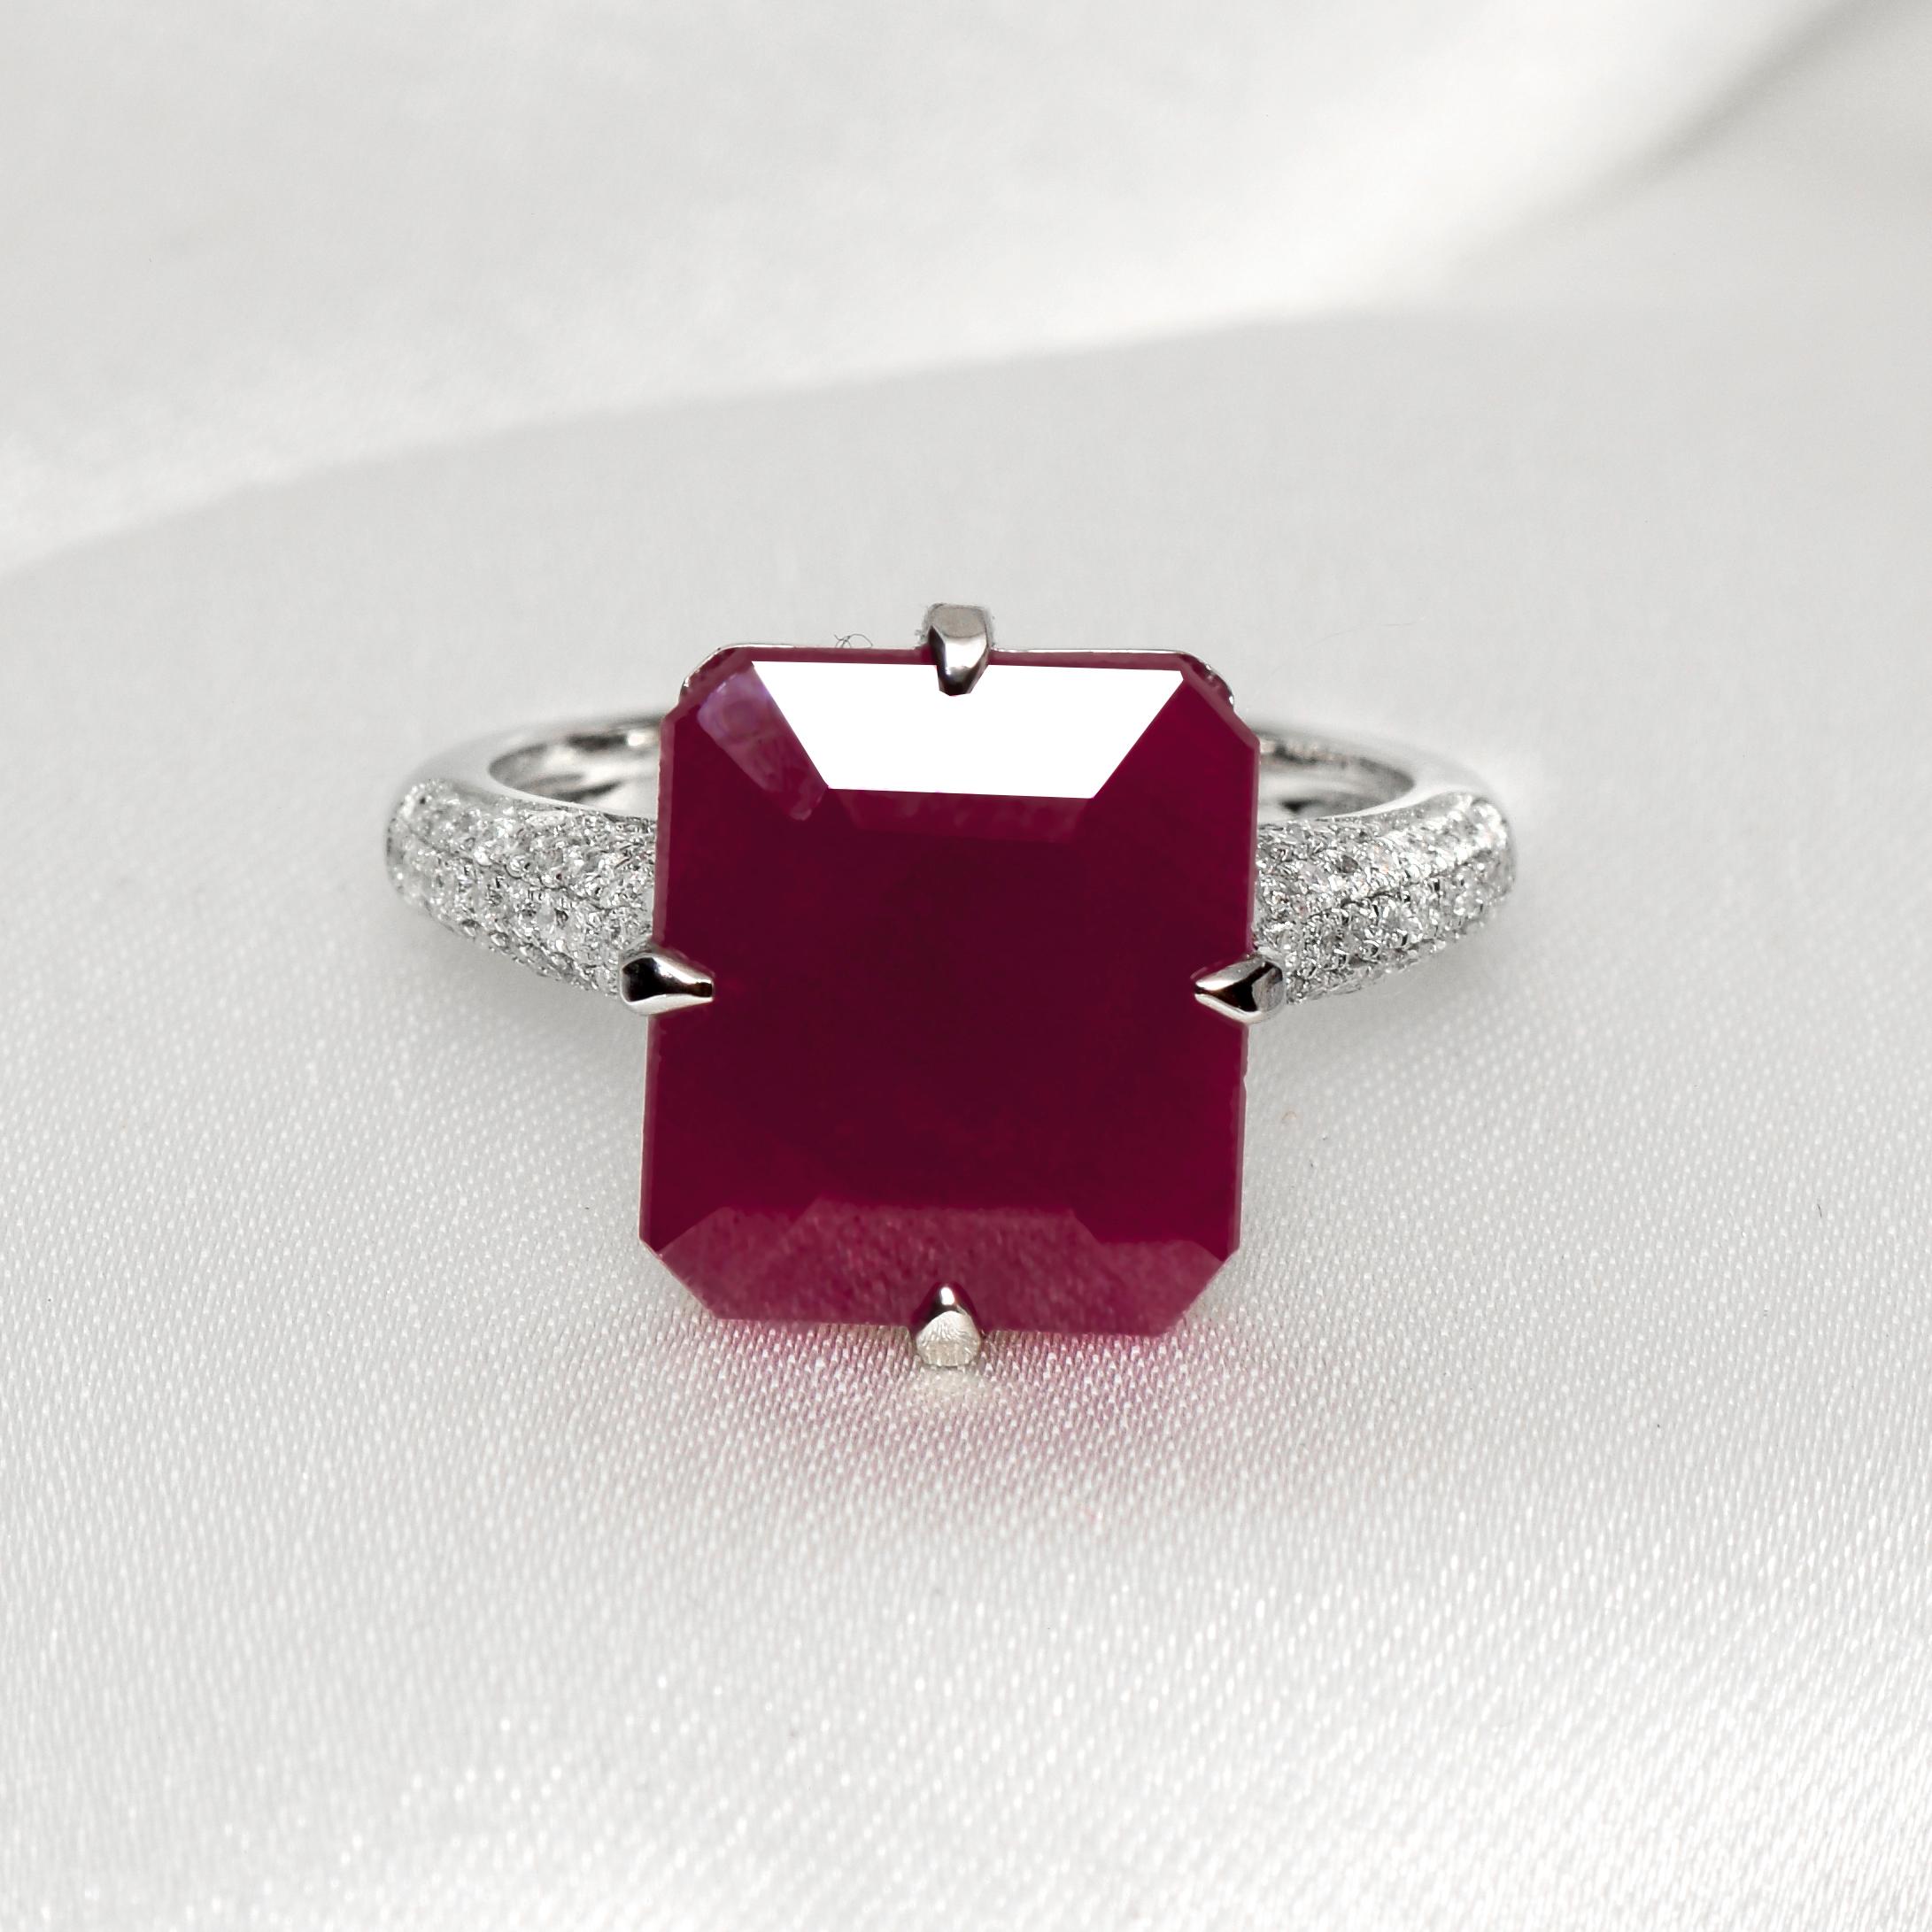 ** IGI-Certified 14K White Gold 10.25 Ct Natural Ruby & Diamonds Engagement Ring**
One IGI-Certified natural unheated purplish red ruby as the center stone weighing 10.25 ct surrounded by the FG VS accent diamonds weighing 0.31 ct on the 14K white